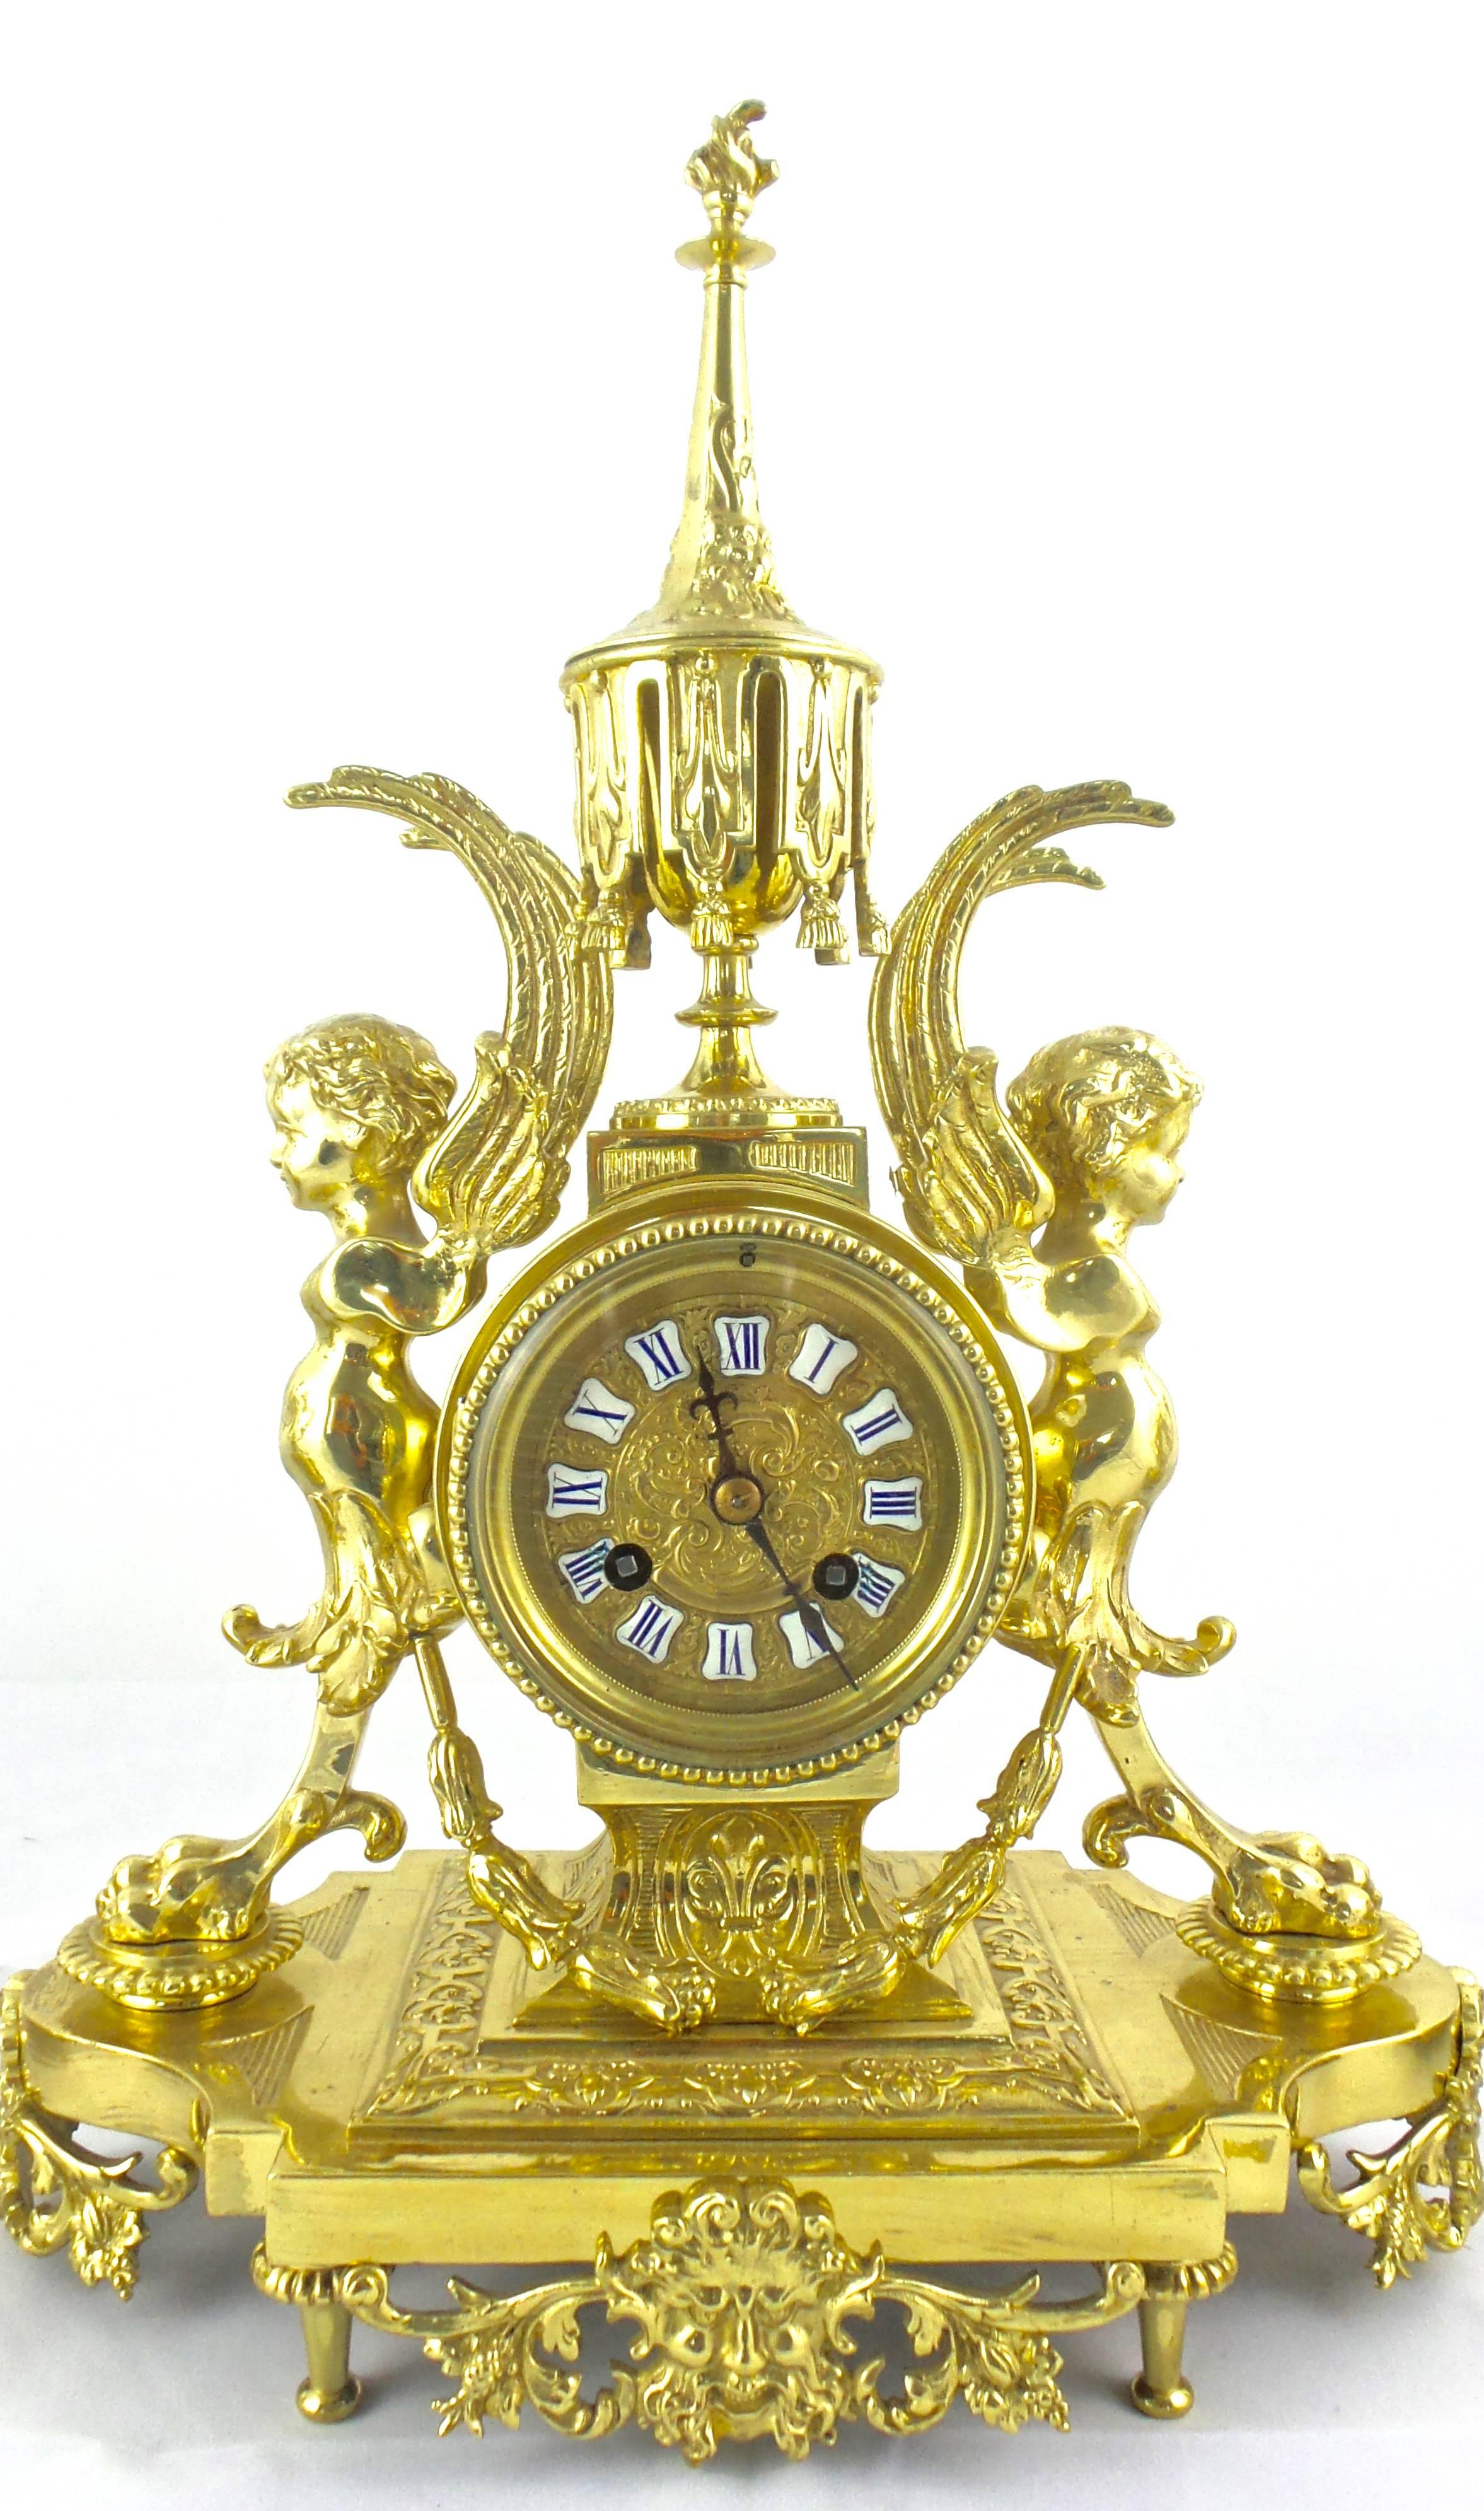 An original authentic antique 19th century French solid gilt brass mantel clock garniture set of rare design with initials D.C impressed
Palace and museum quality clock set 
Original matching candelabra garnitures 
Elaborate designs all over and